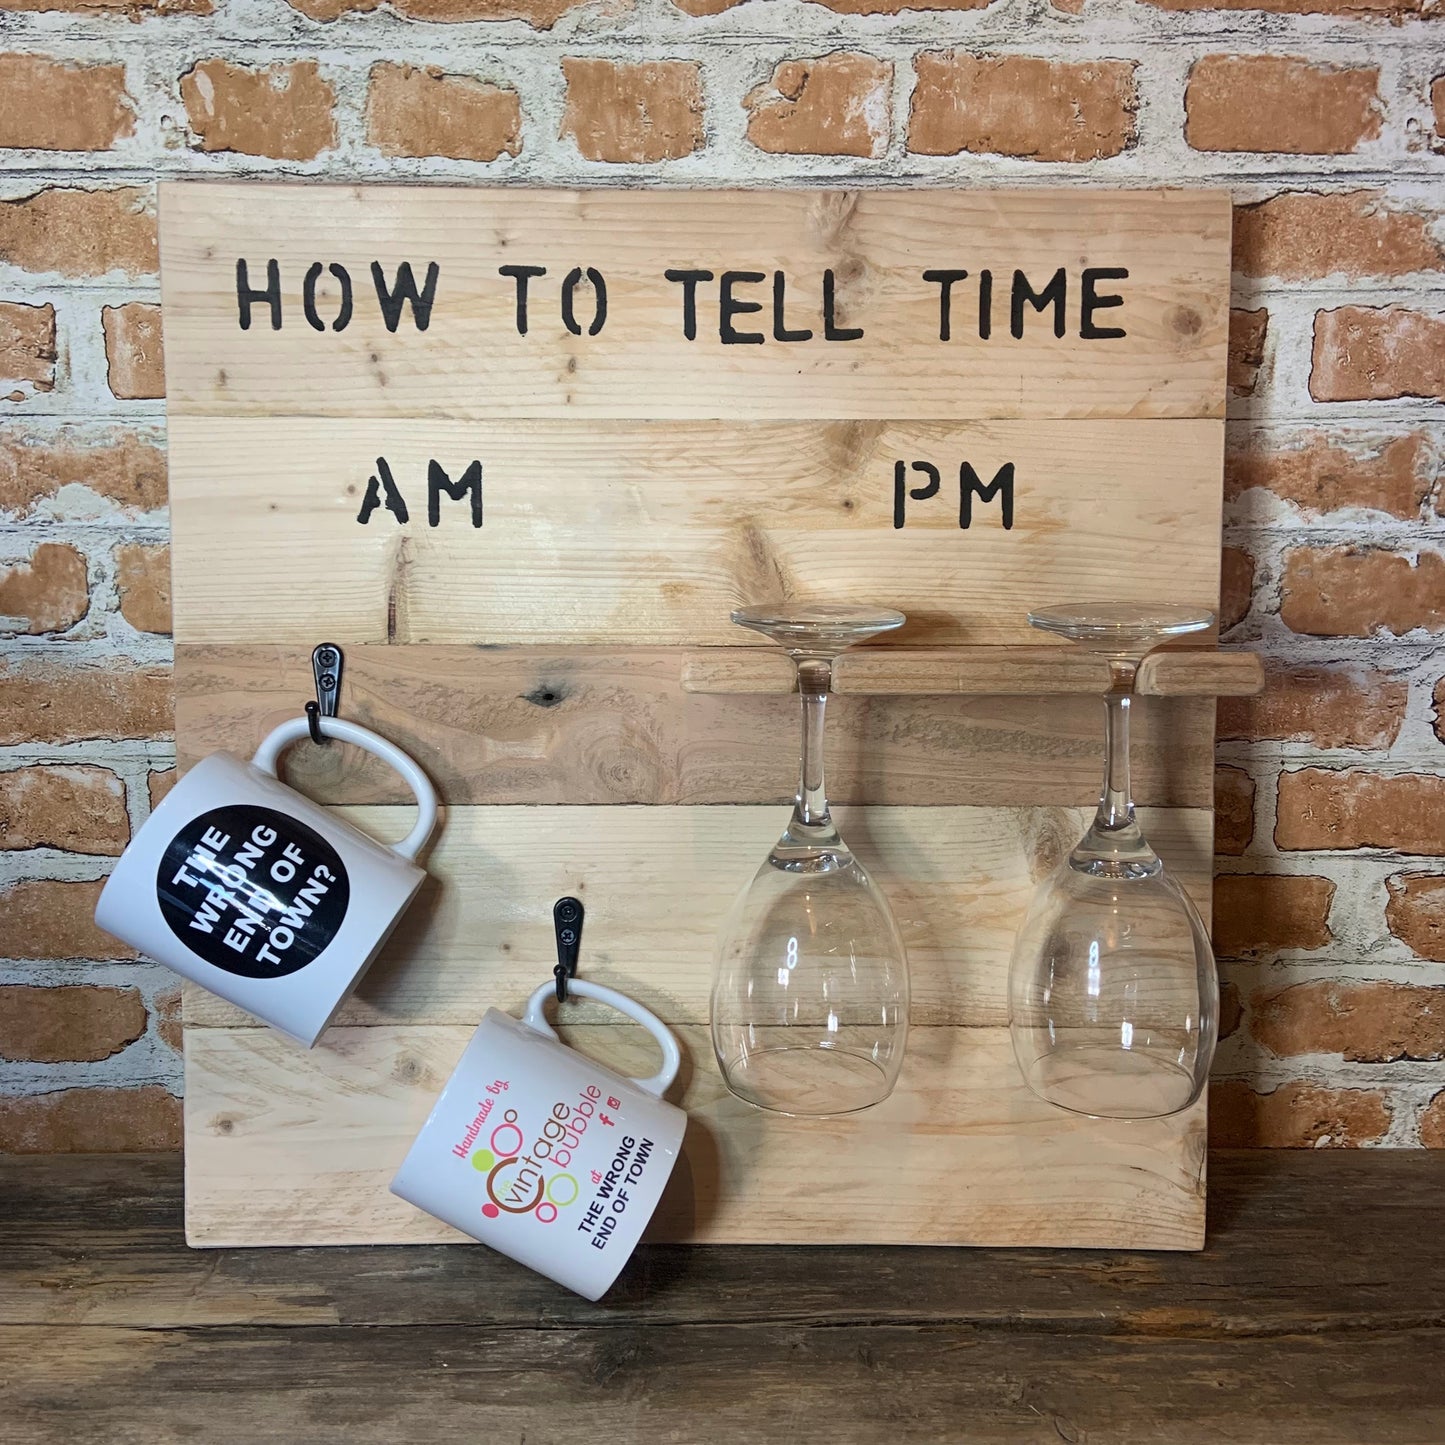 How to tell the time AM PM - coffee and wine plaque from The Wrong End of Town